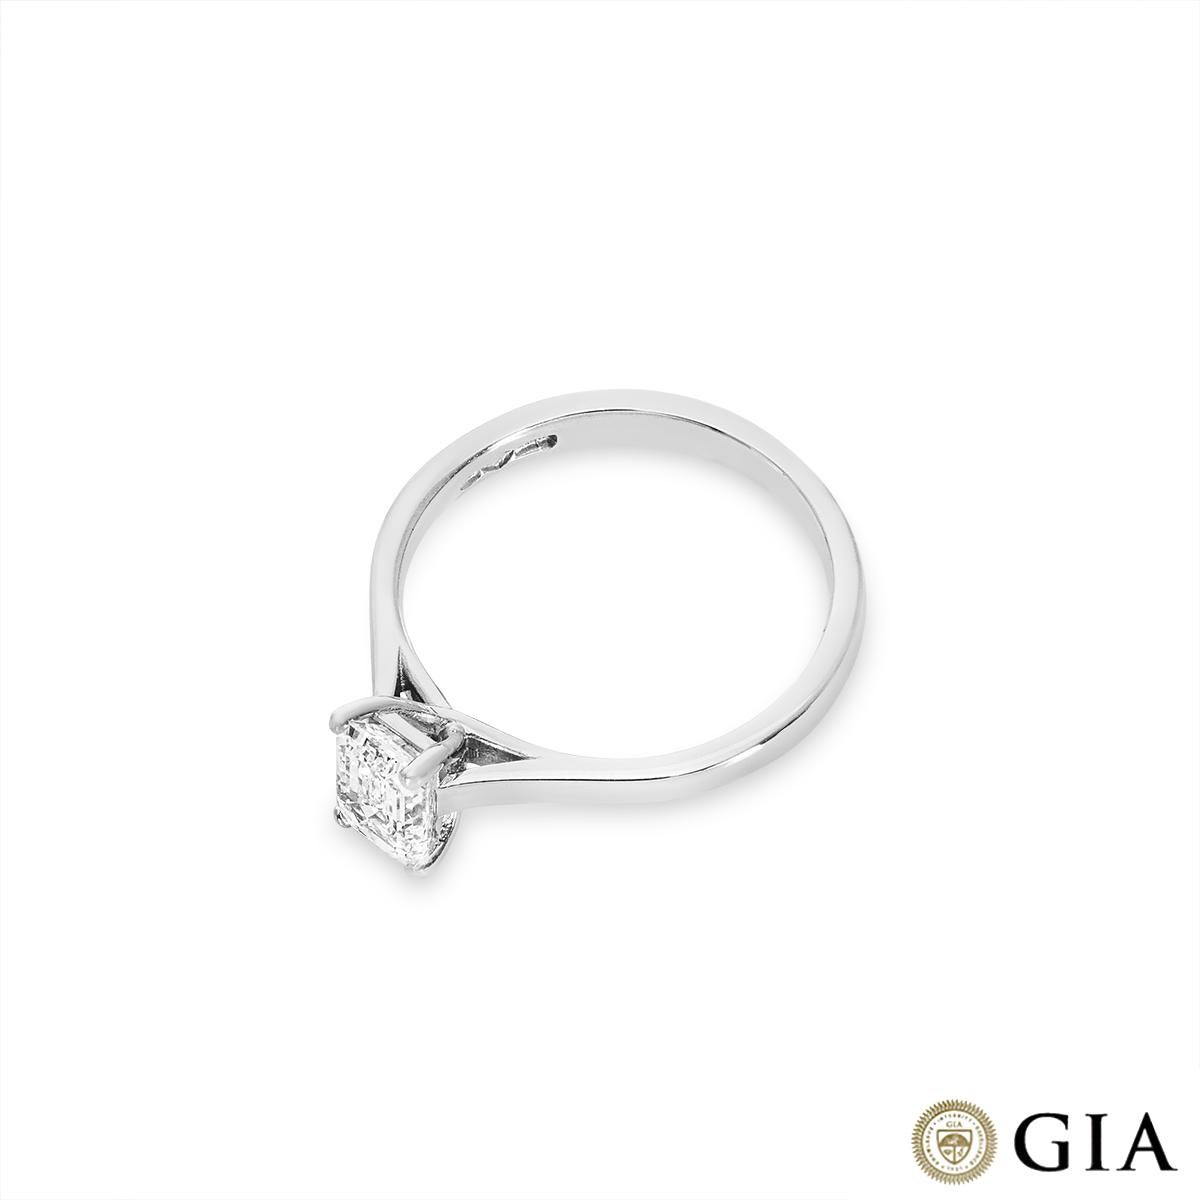 Women's GIA Certified Platinum Emerald Cut Diamond Ring 0.74ct D/IF For Sale